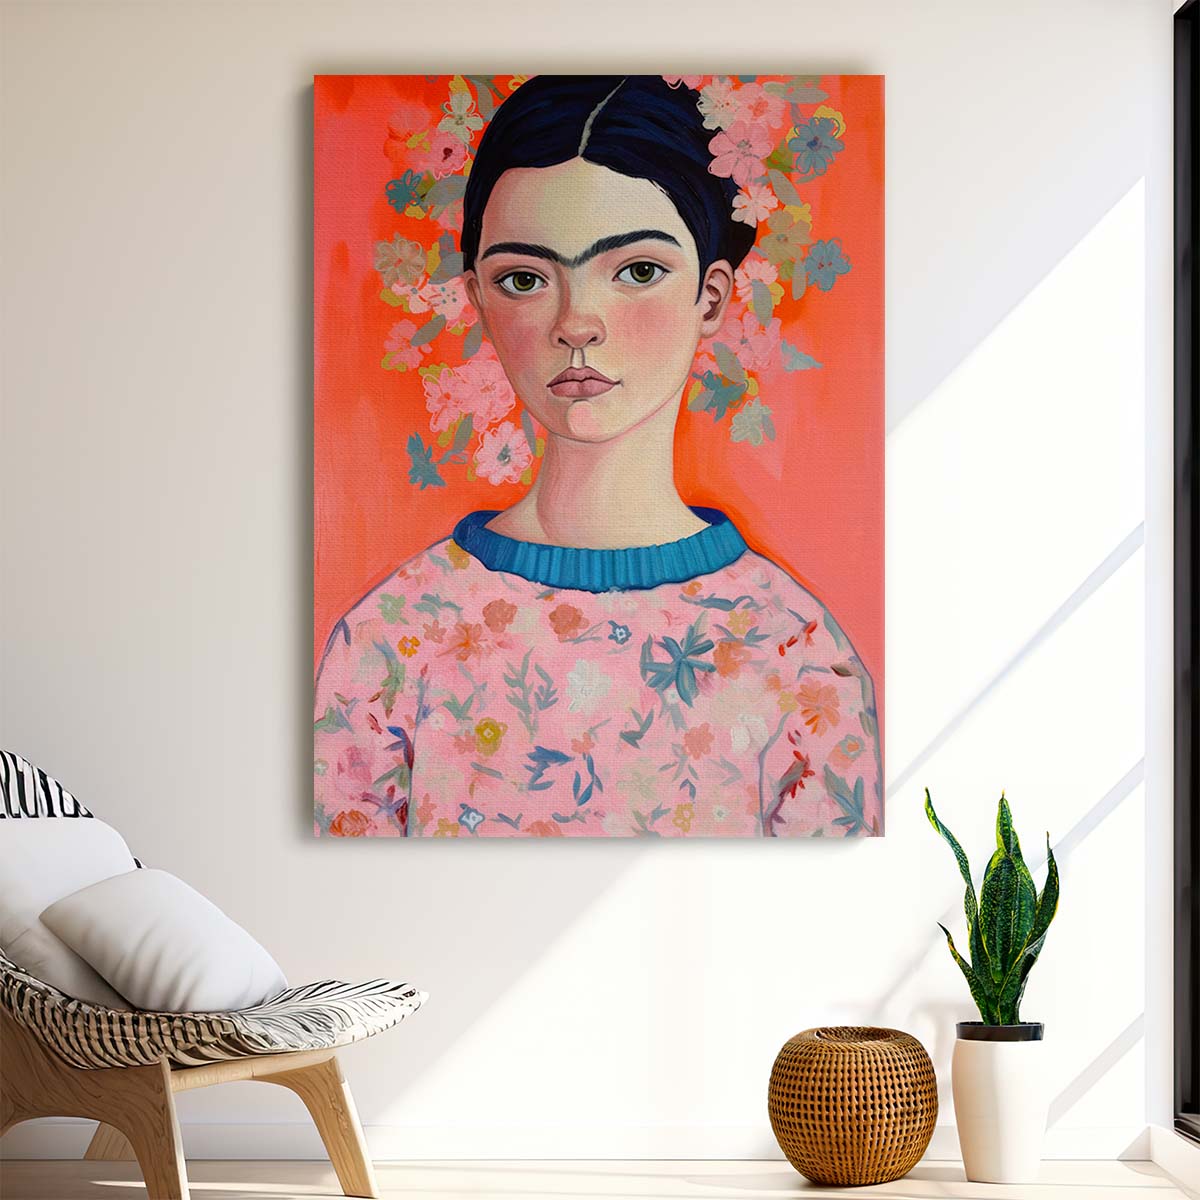 Colorful Young Frida Kahlo Illustration with Big Eyes & Flowers by Luxuriance Designs, made in USA